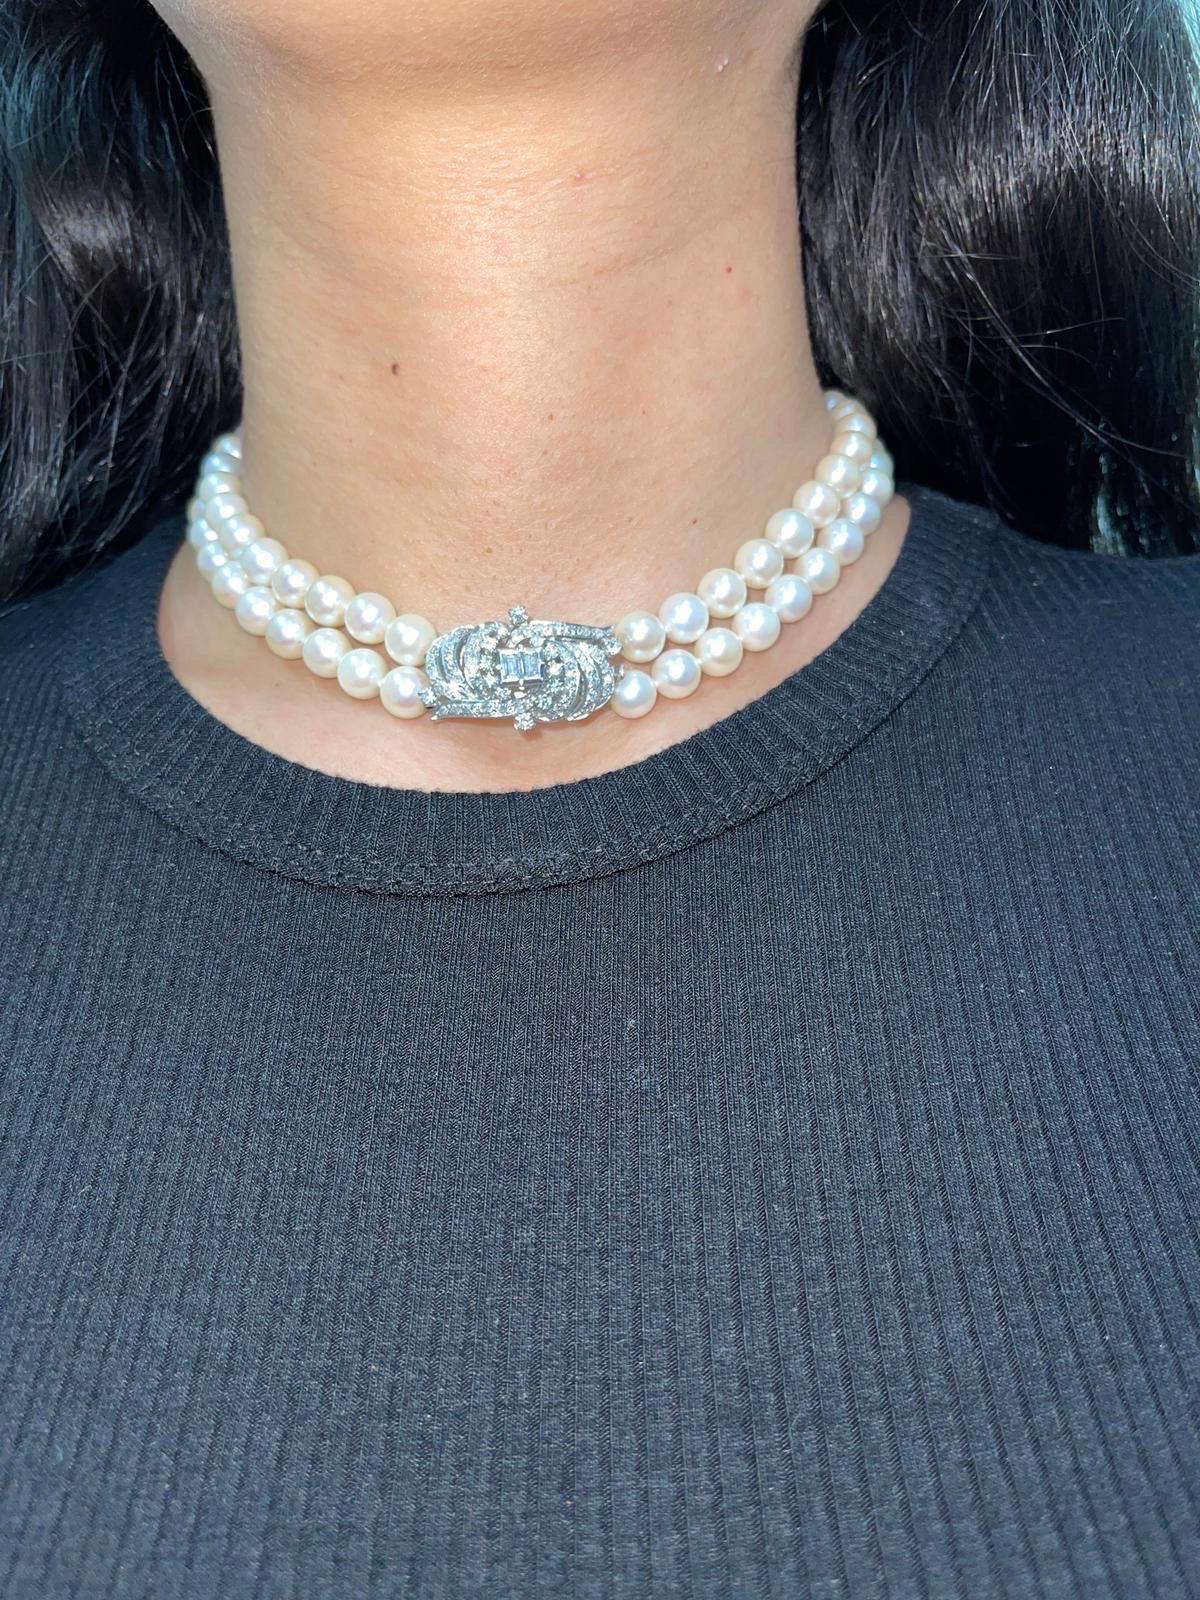 Antique 5.00 Carat Diamonds and Pearls Choker Necklace 18k White Gold For Sale 1